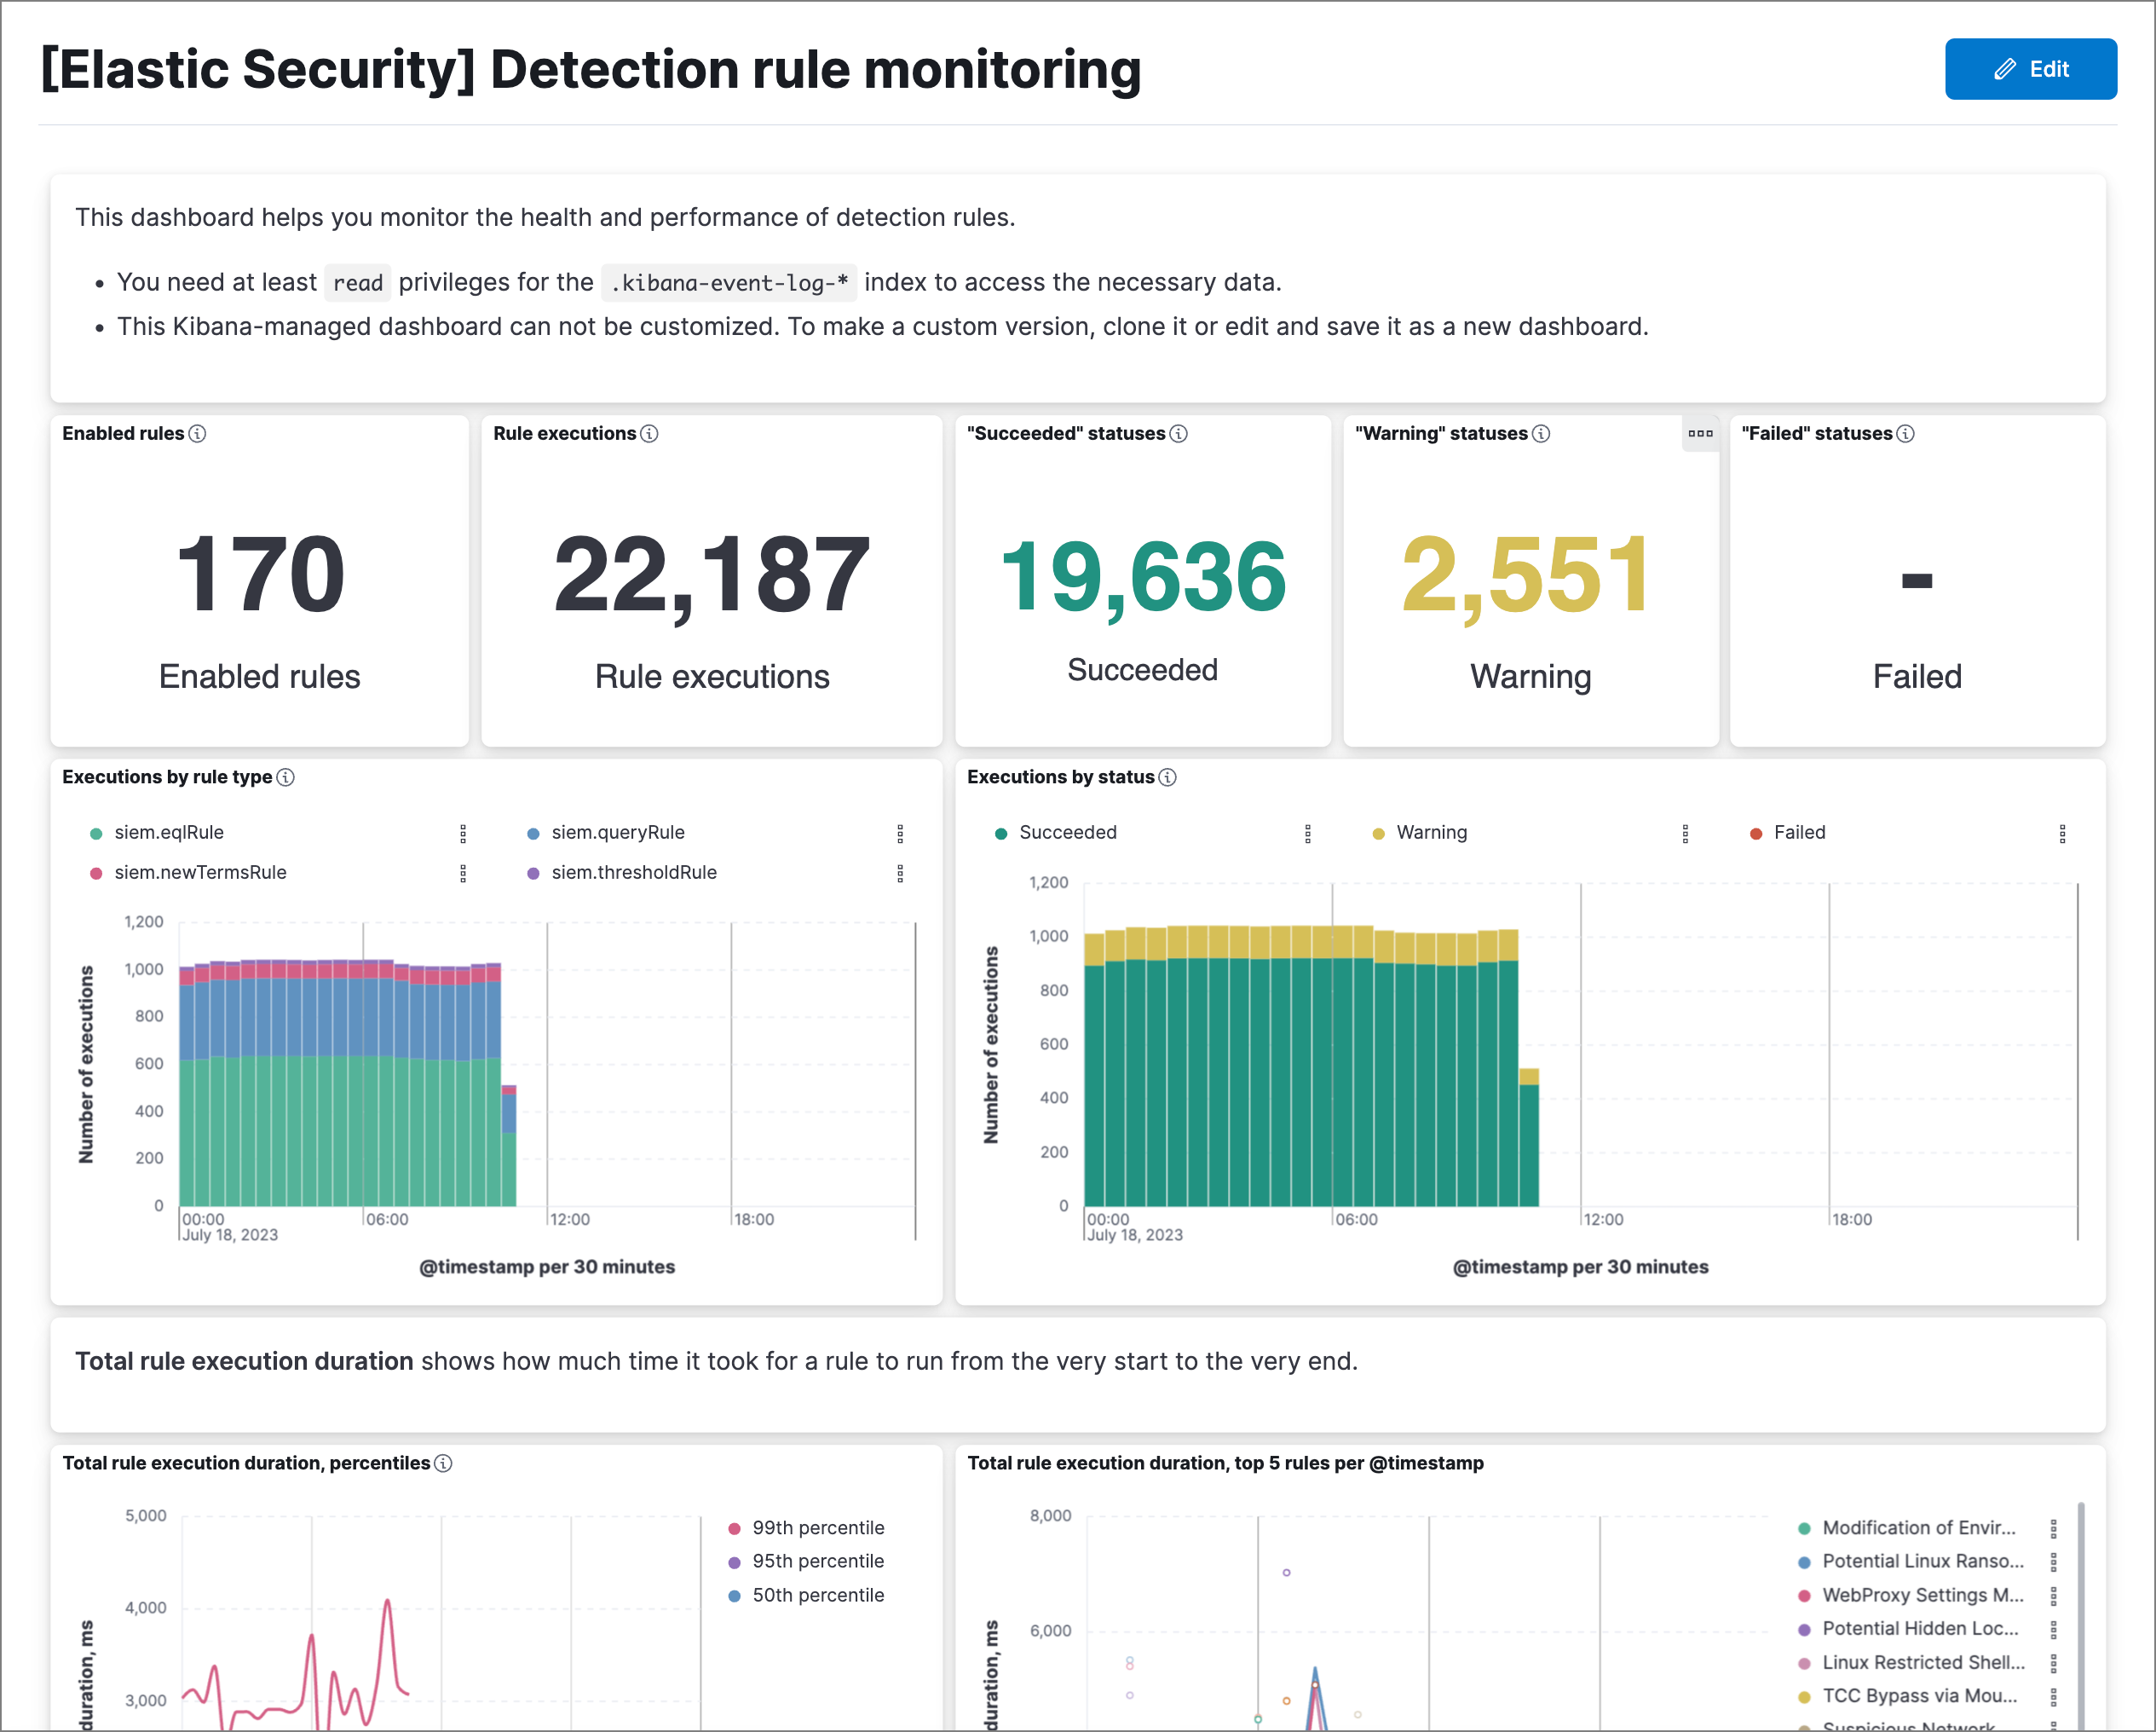 Overview of Detection rule monitoring dashboard